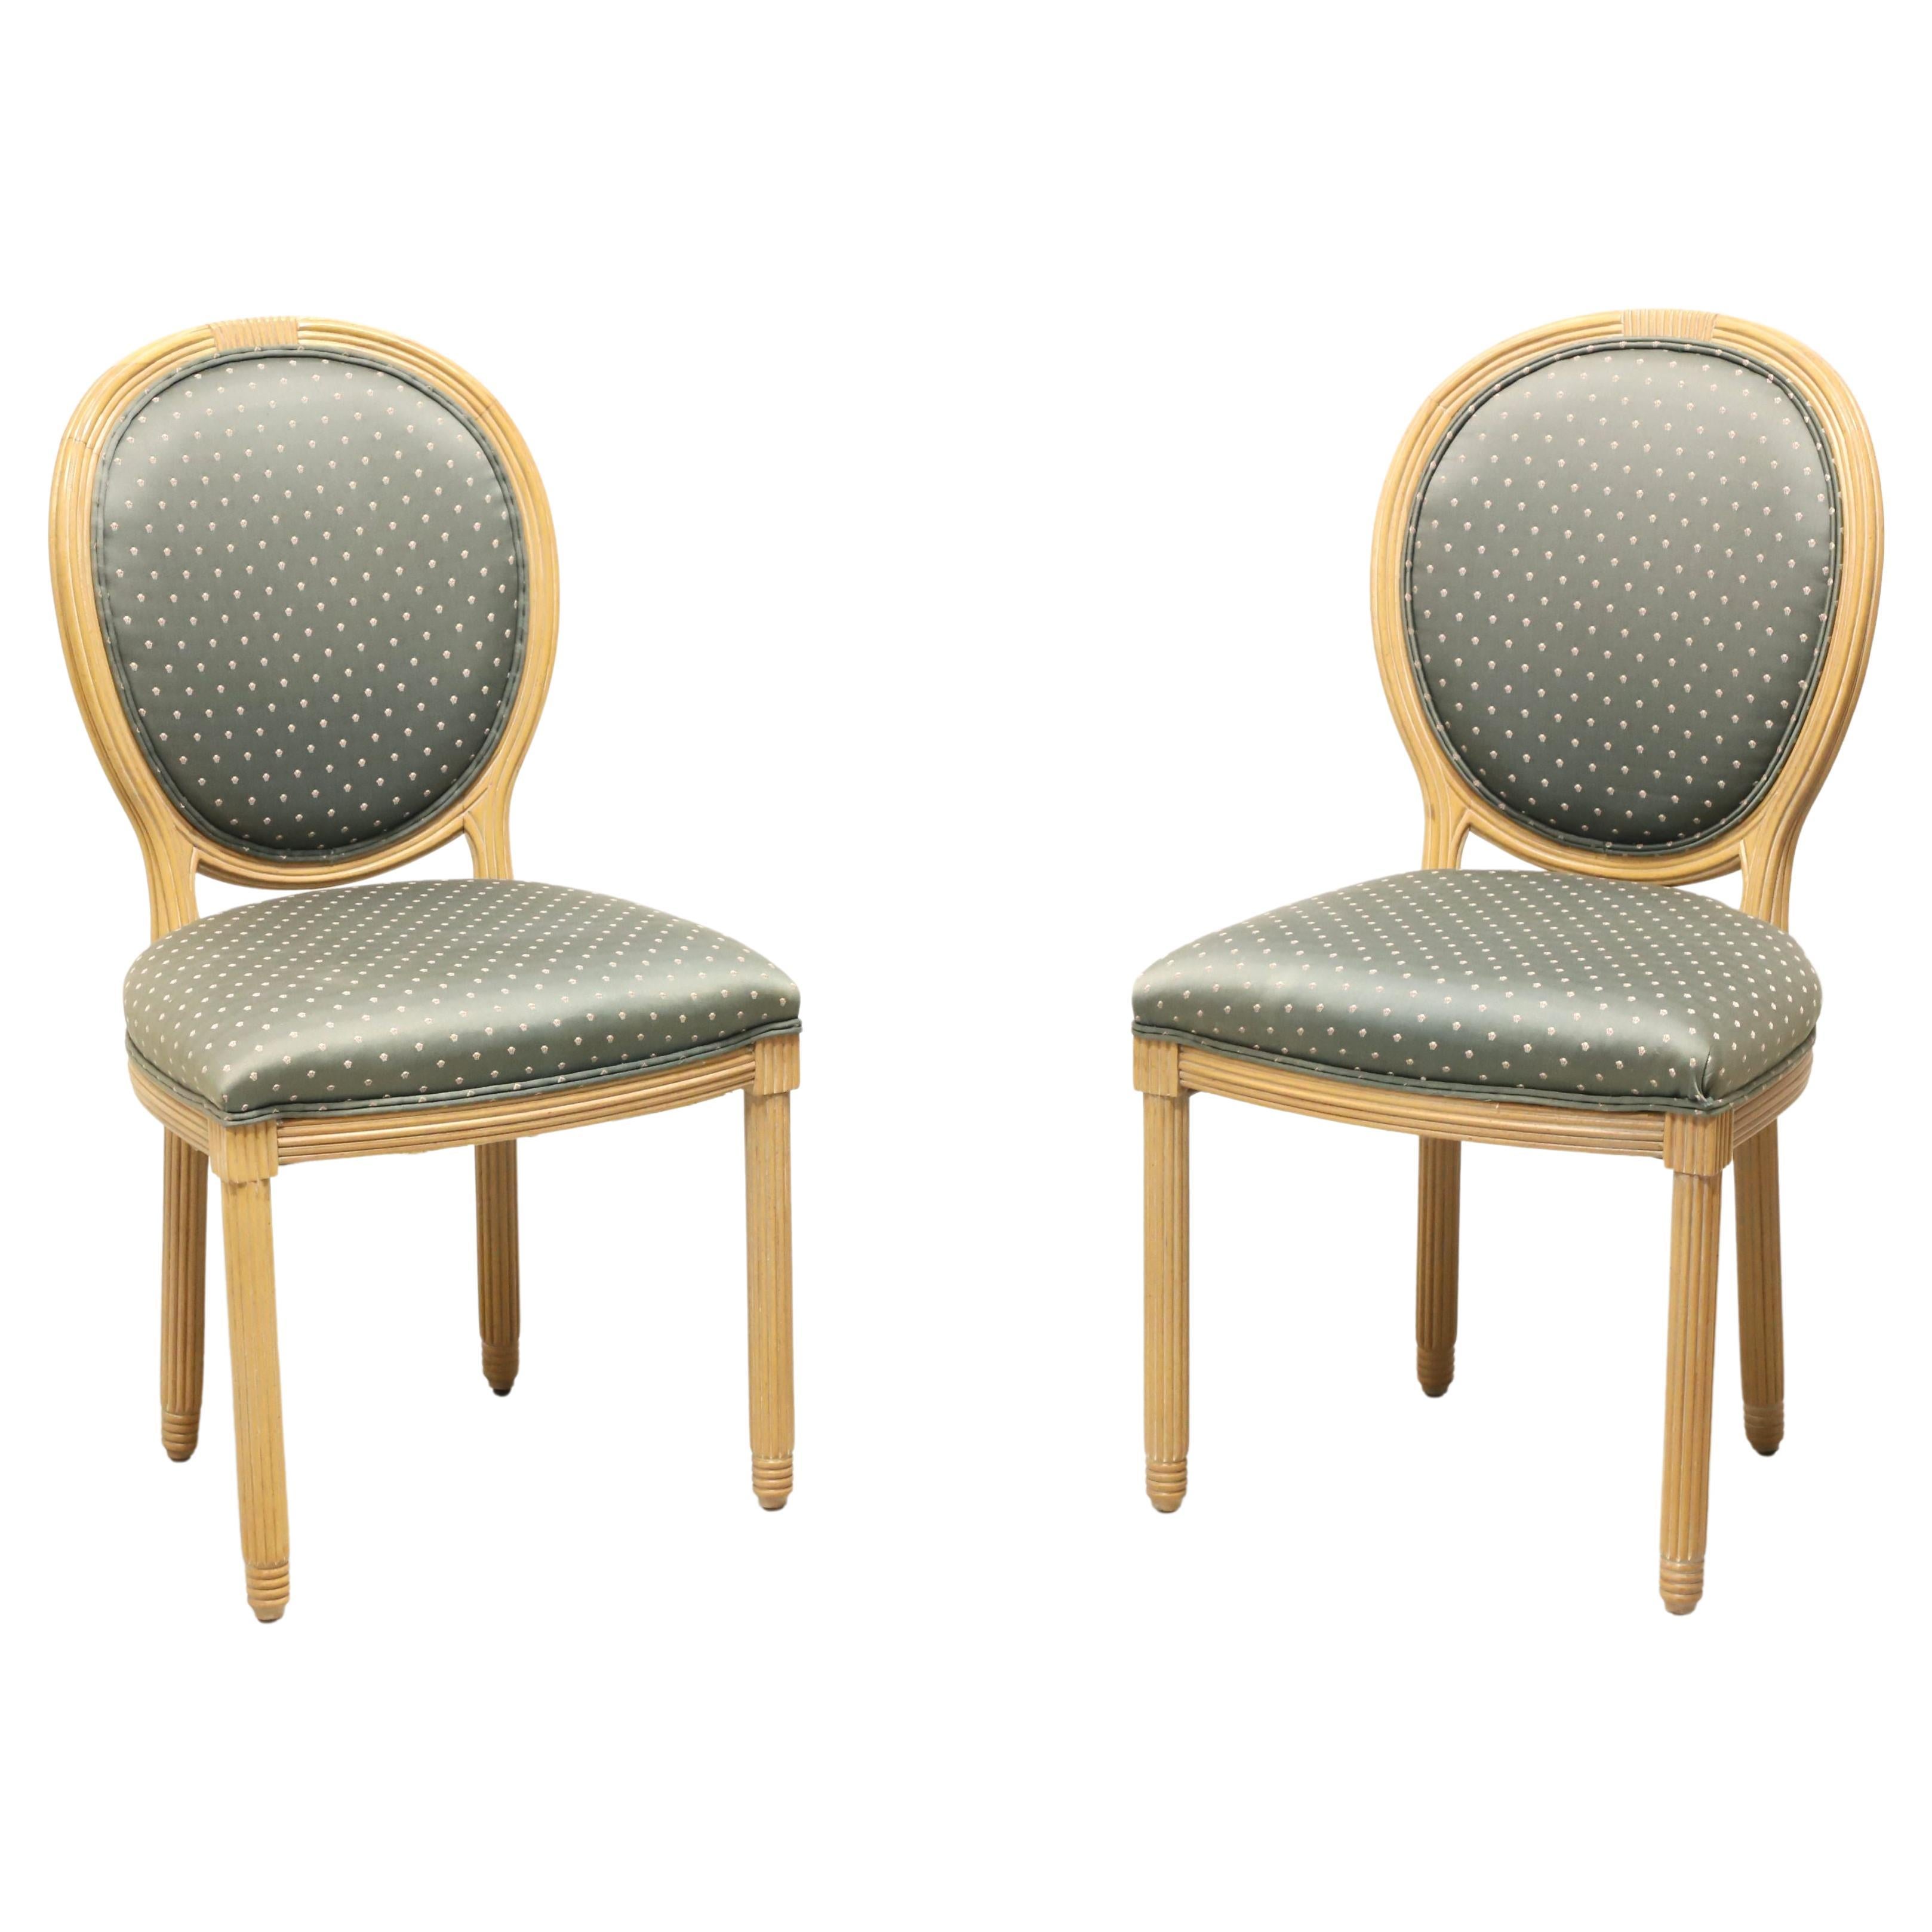 AMERICAN OF MARTINSVILLE French Provincial Louis XVI Dining Side Chairs - Pair B For Sale